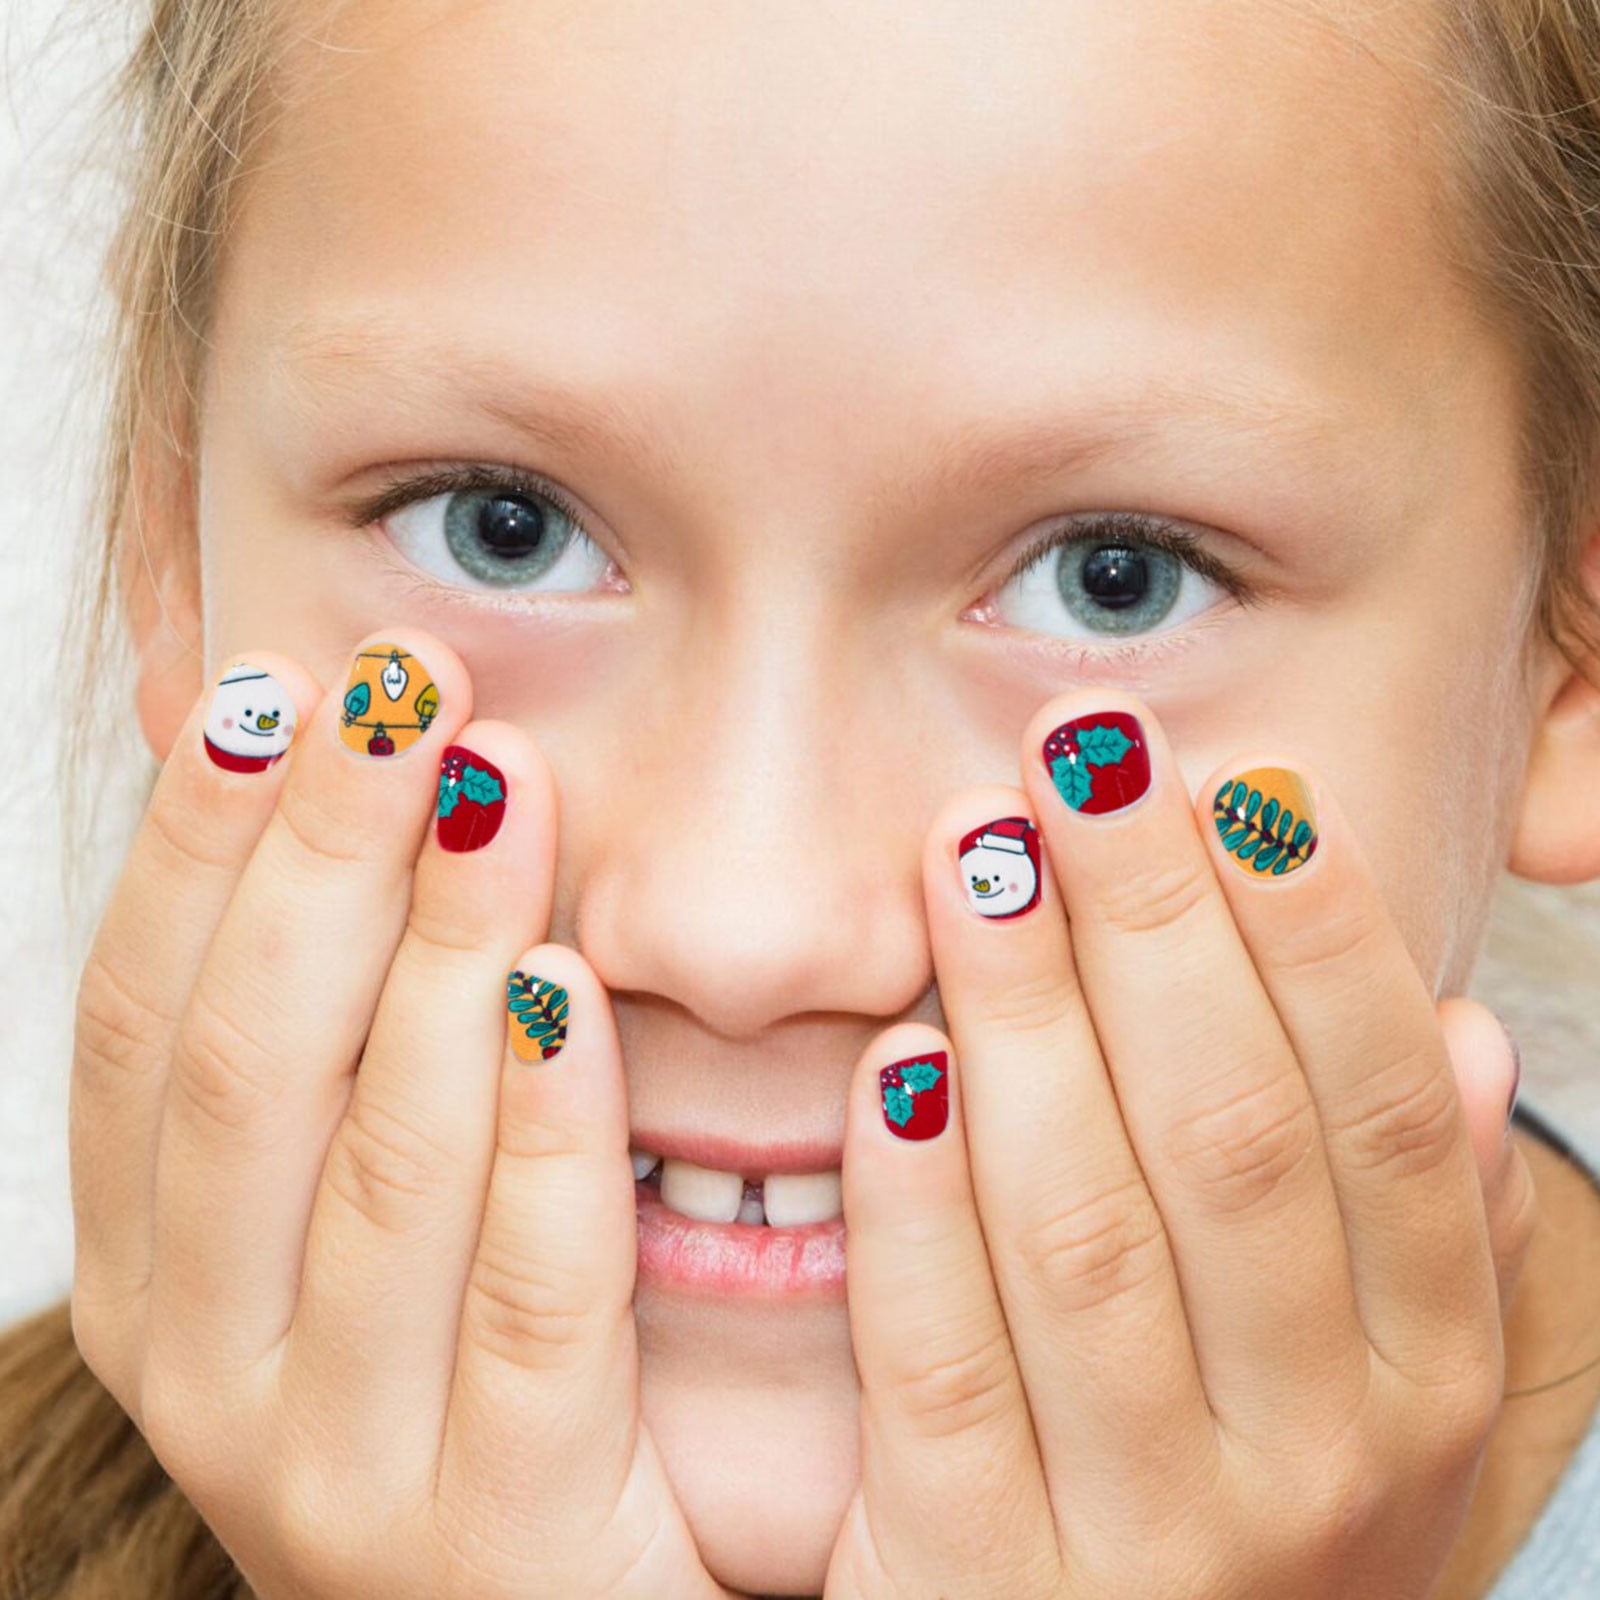 The musings of our rainbow drenched world 🌈 | Kids nail designs, Cute nail  art, Lisa frank